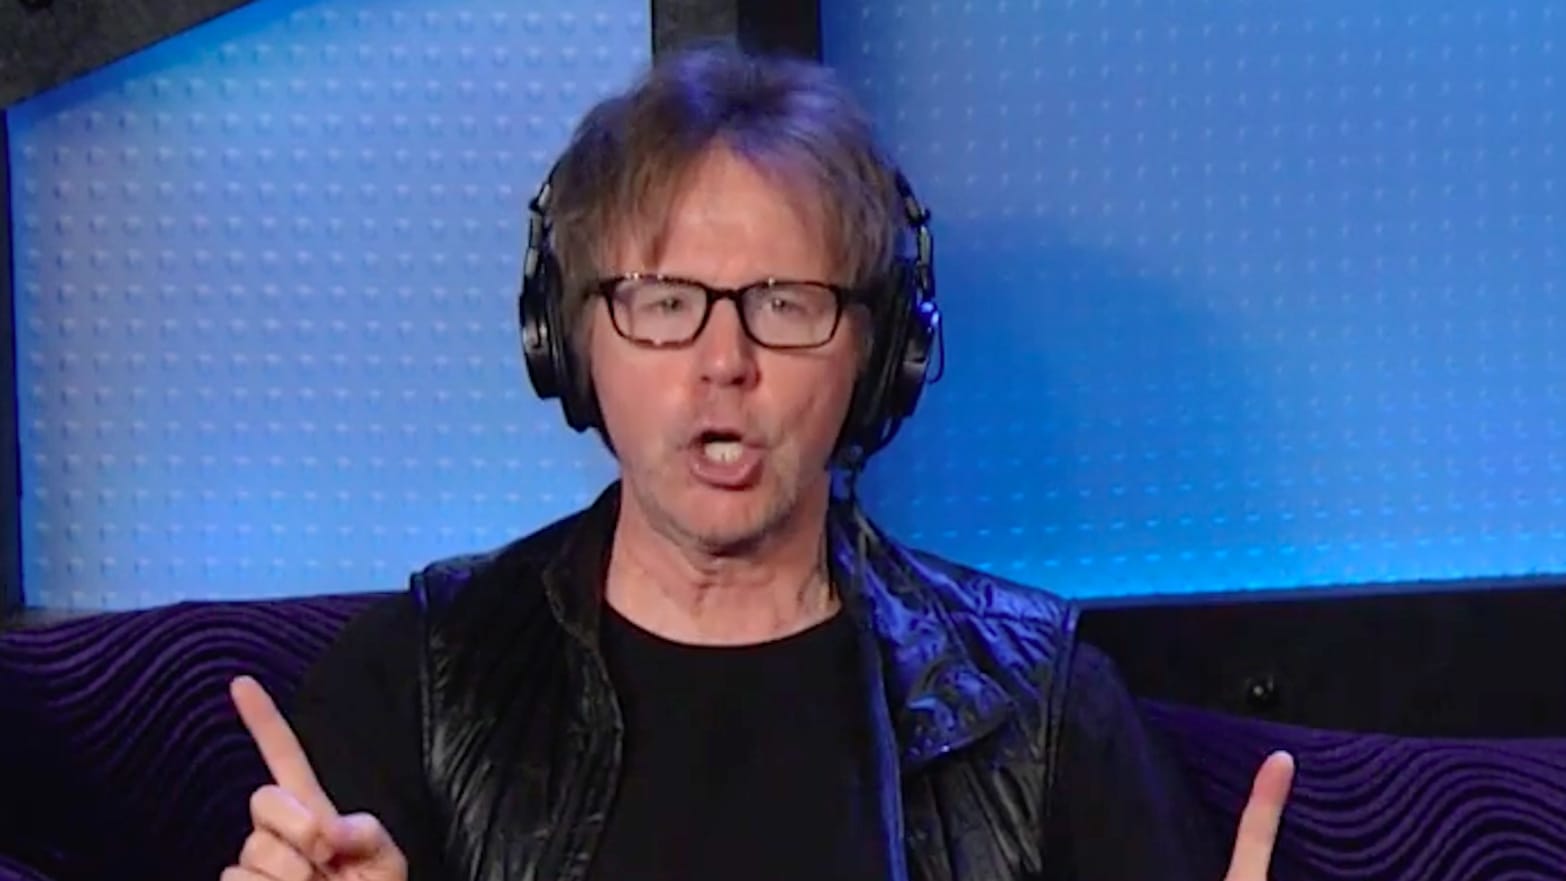 Dana Carvey Does 17 Celebrity Micro Impressions In 2 Minutes